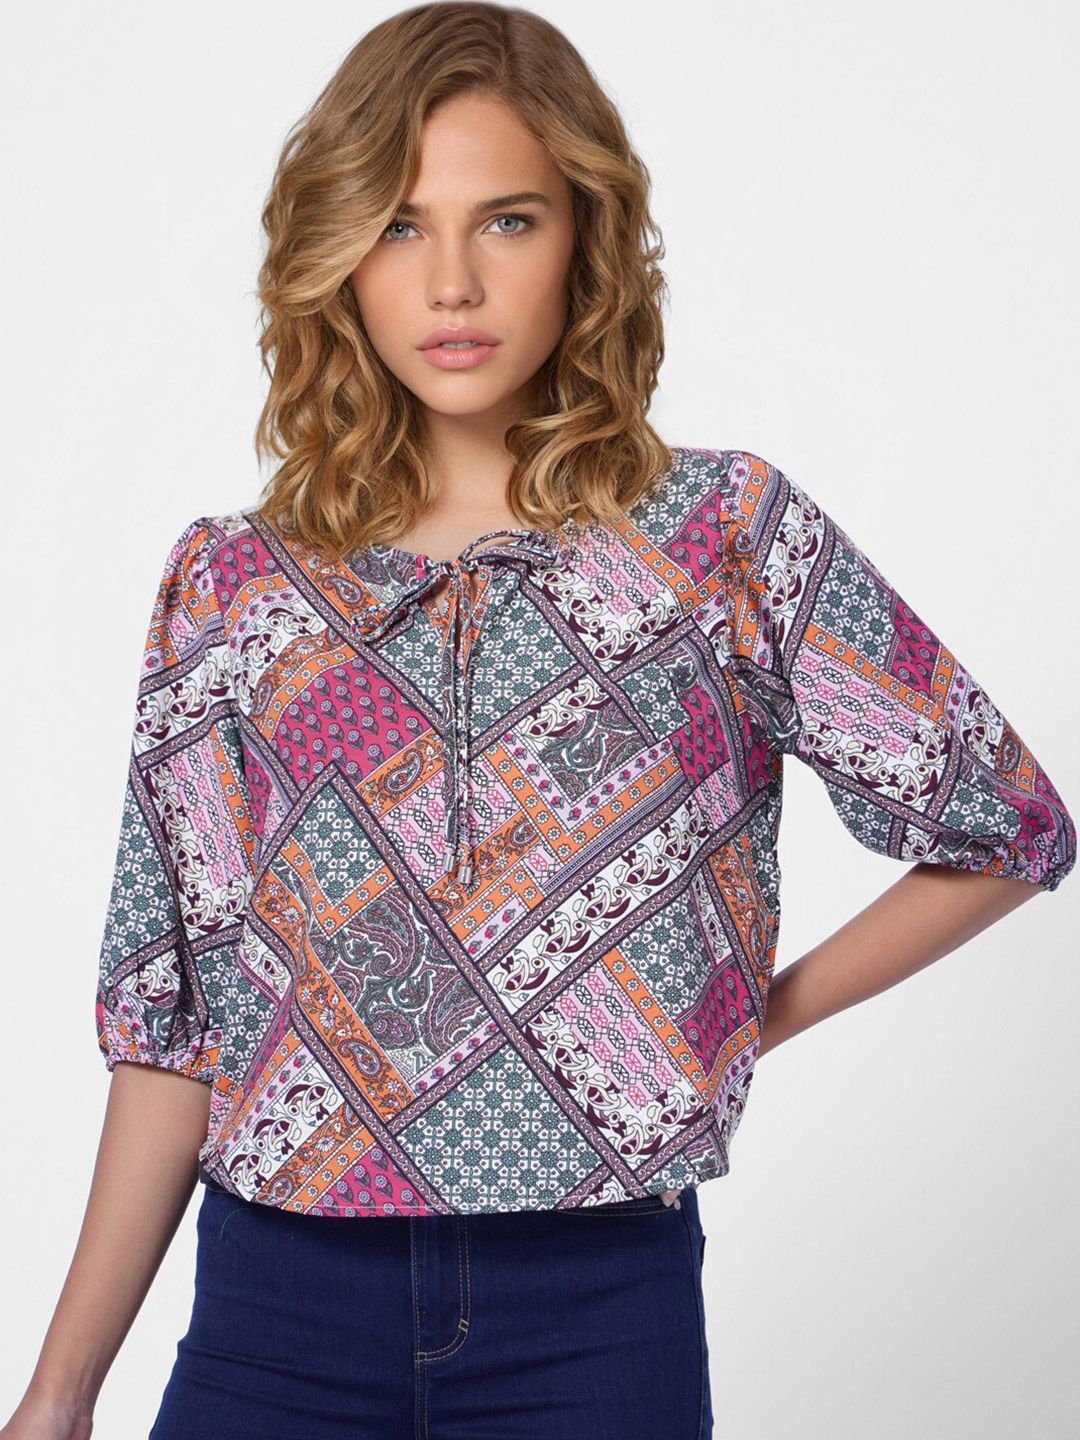 ONLY Women Multicolor Printed Keyhole Neck Blouson Top Price in India